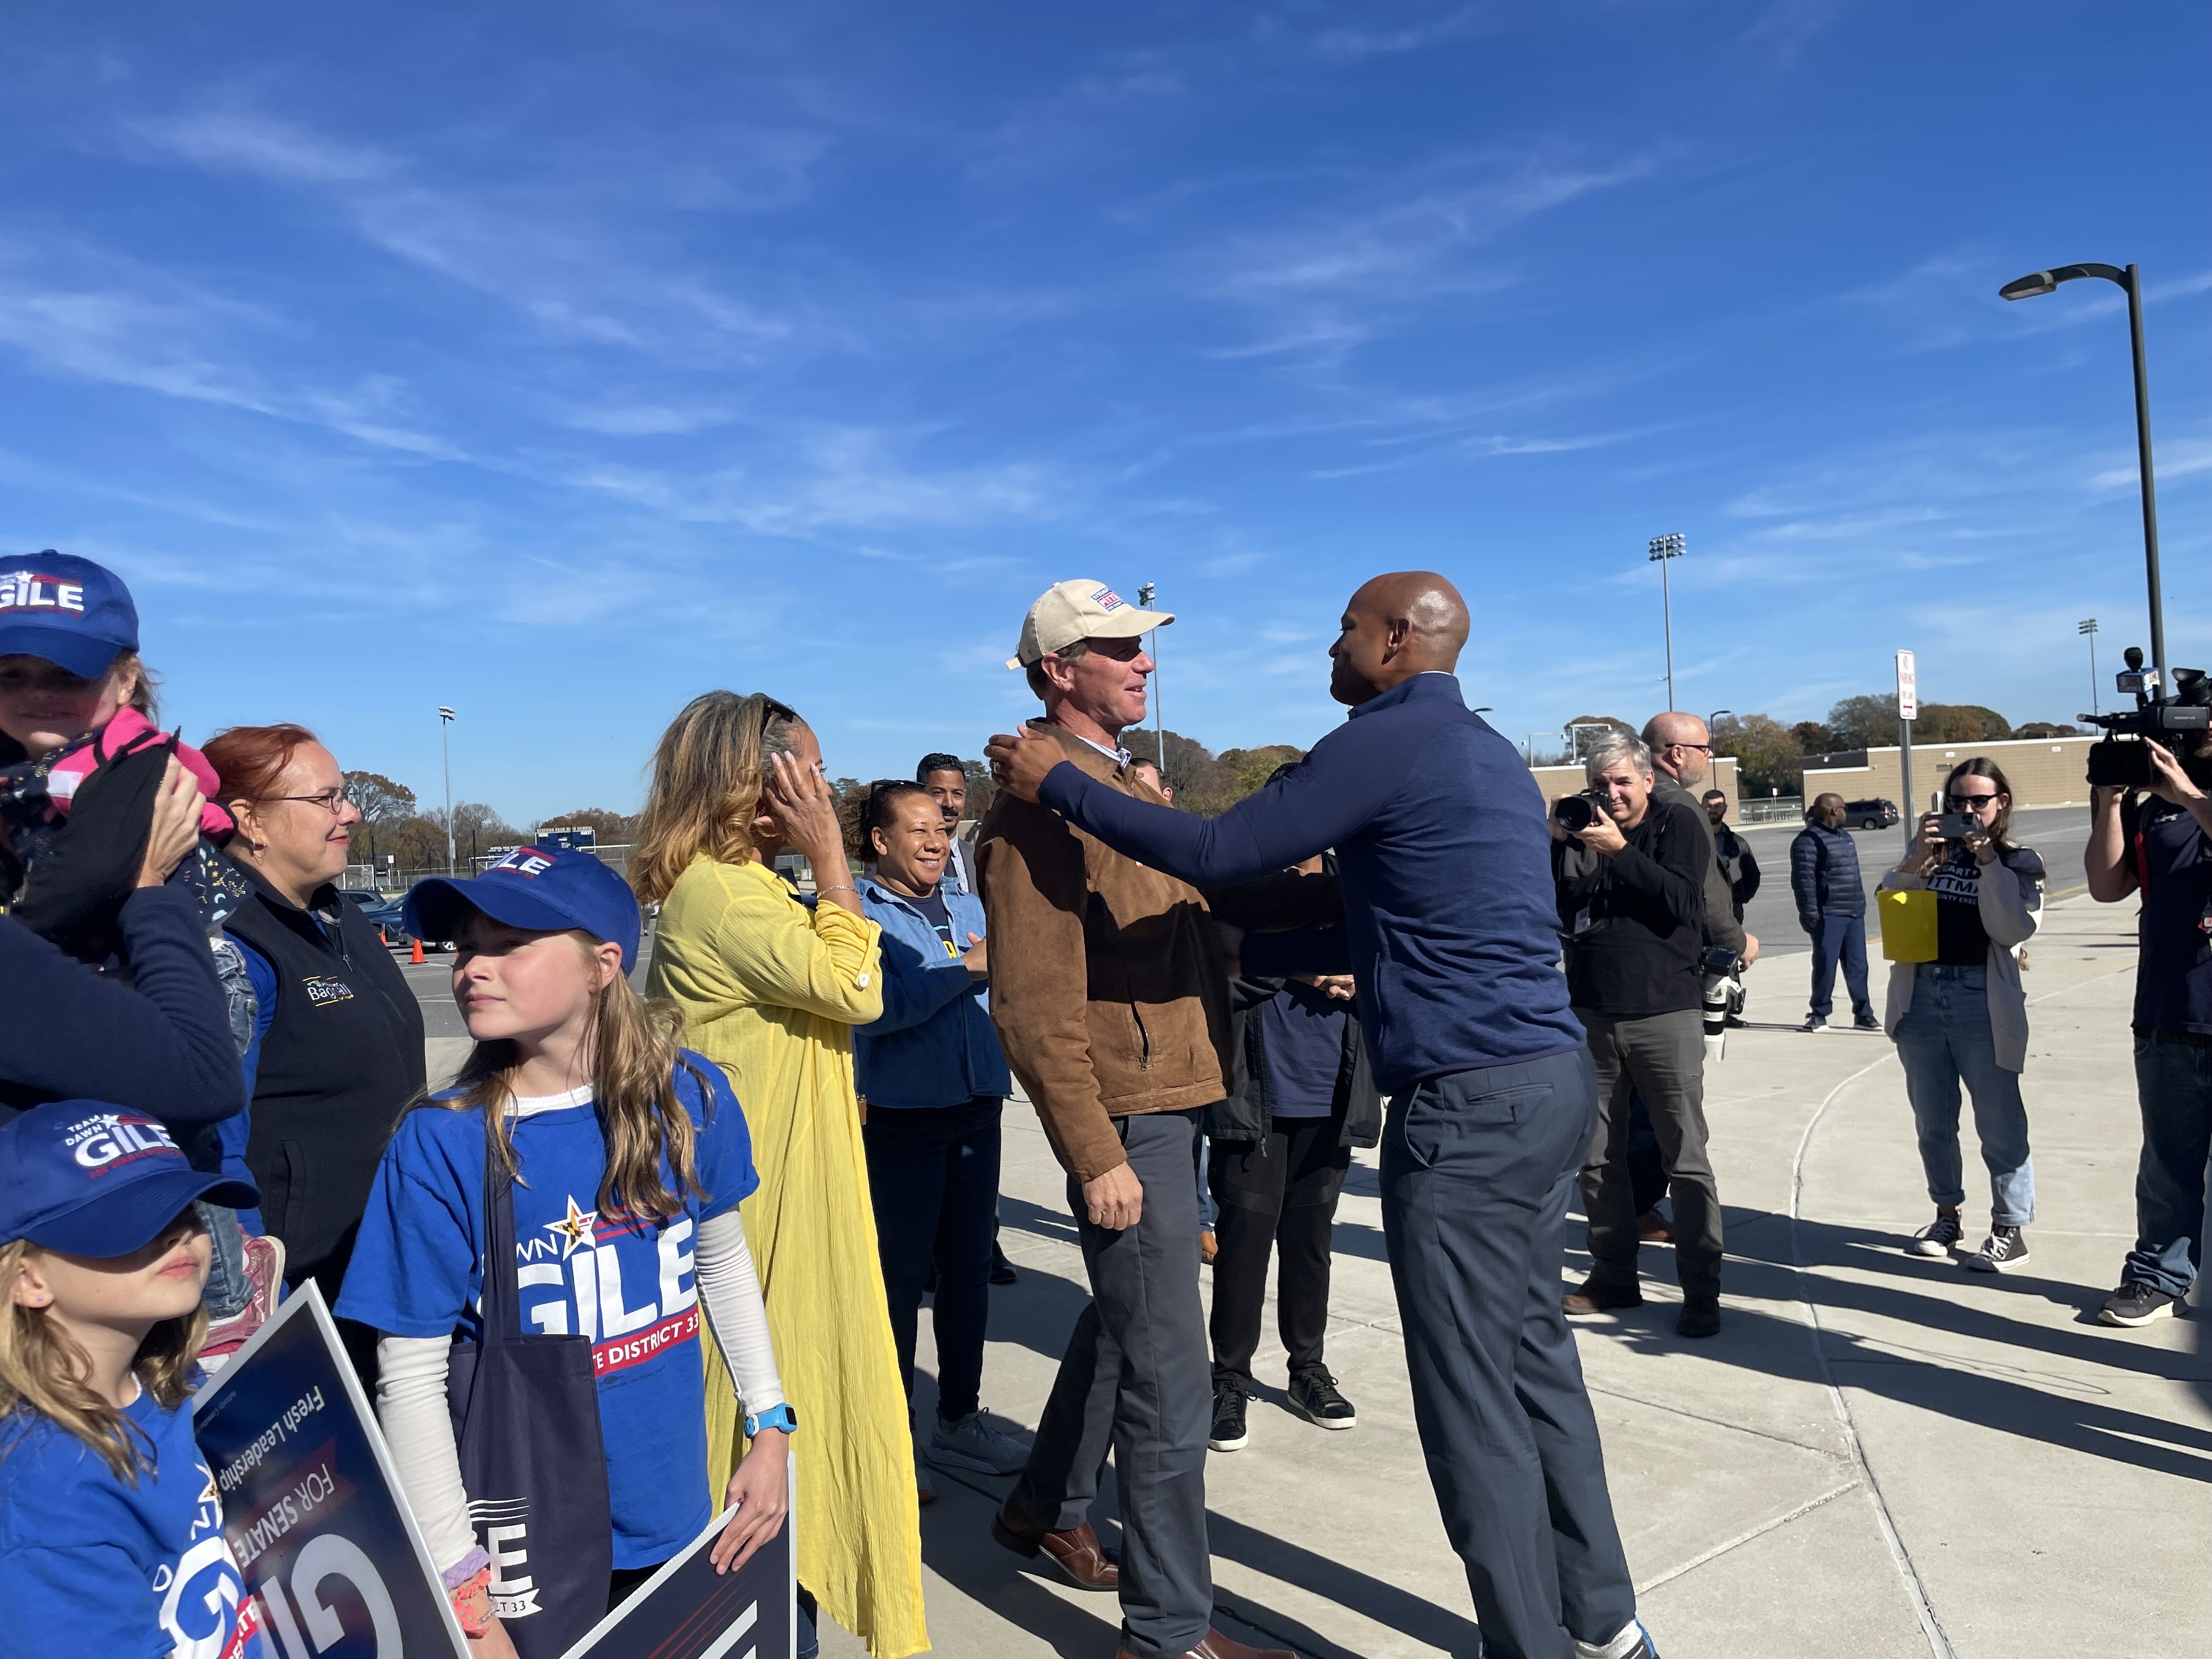 Democratic gubernatorial candidate Wes Moore and Anne Arundel County Executive Steuart Pittman outside Severna Park High School on Election Day.